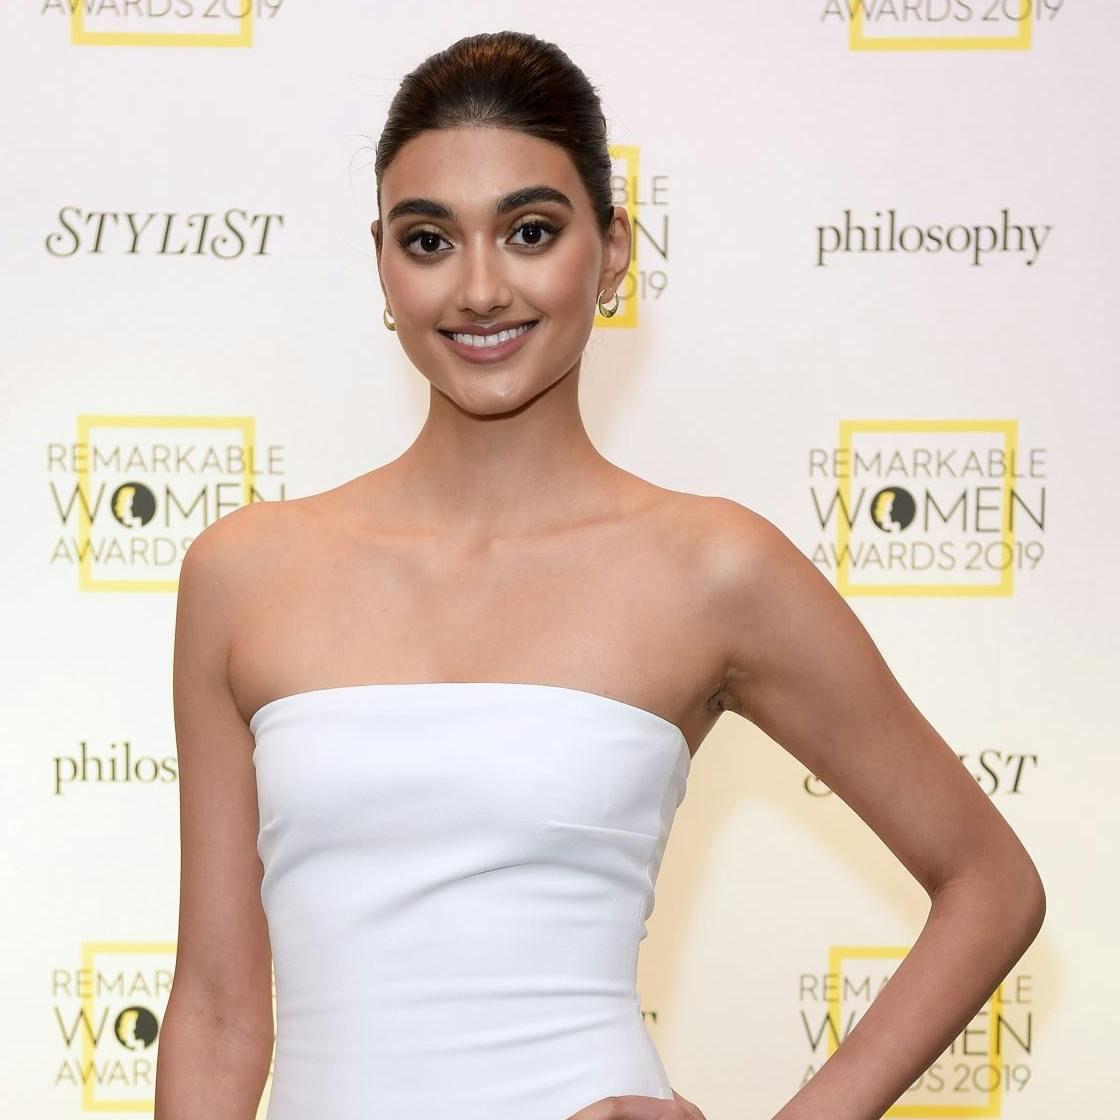 Why everyone was wearing white on the Remarkable Women Awards red carpet